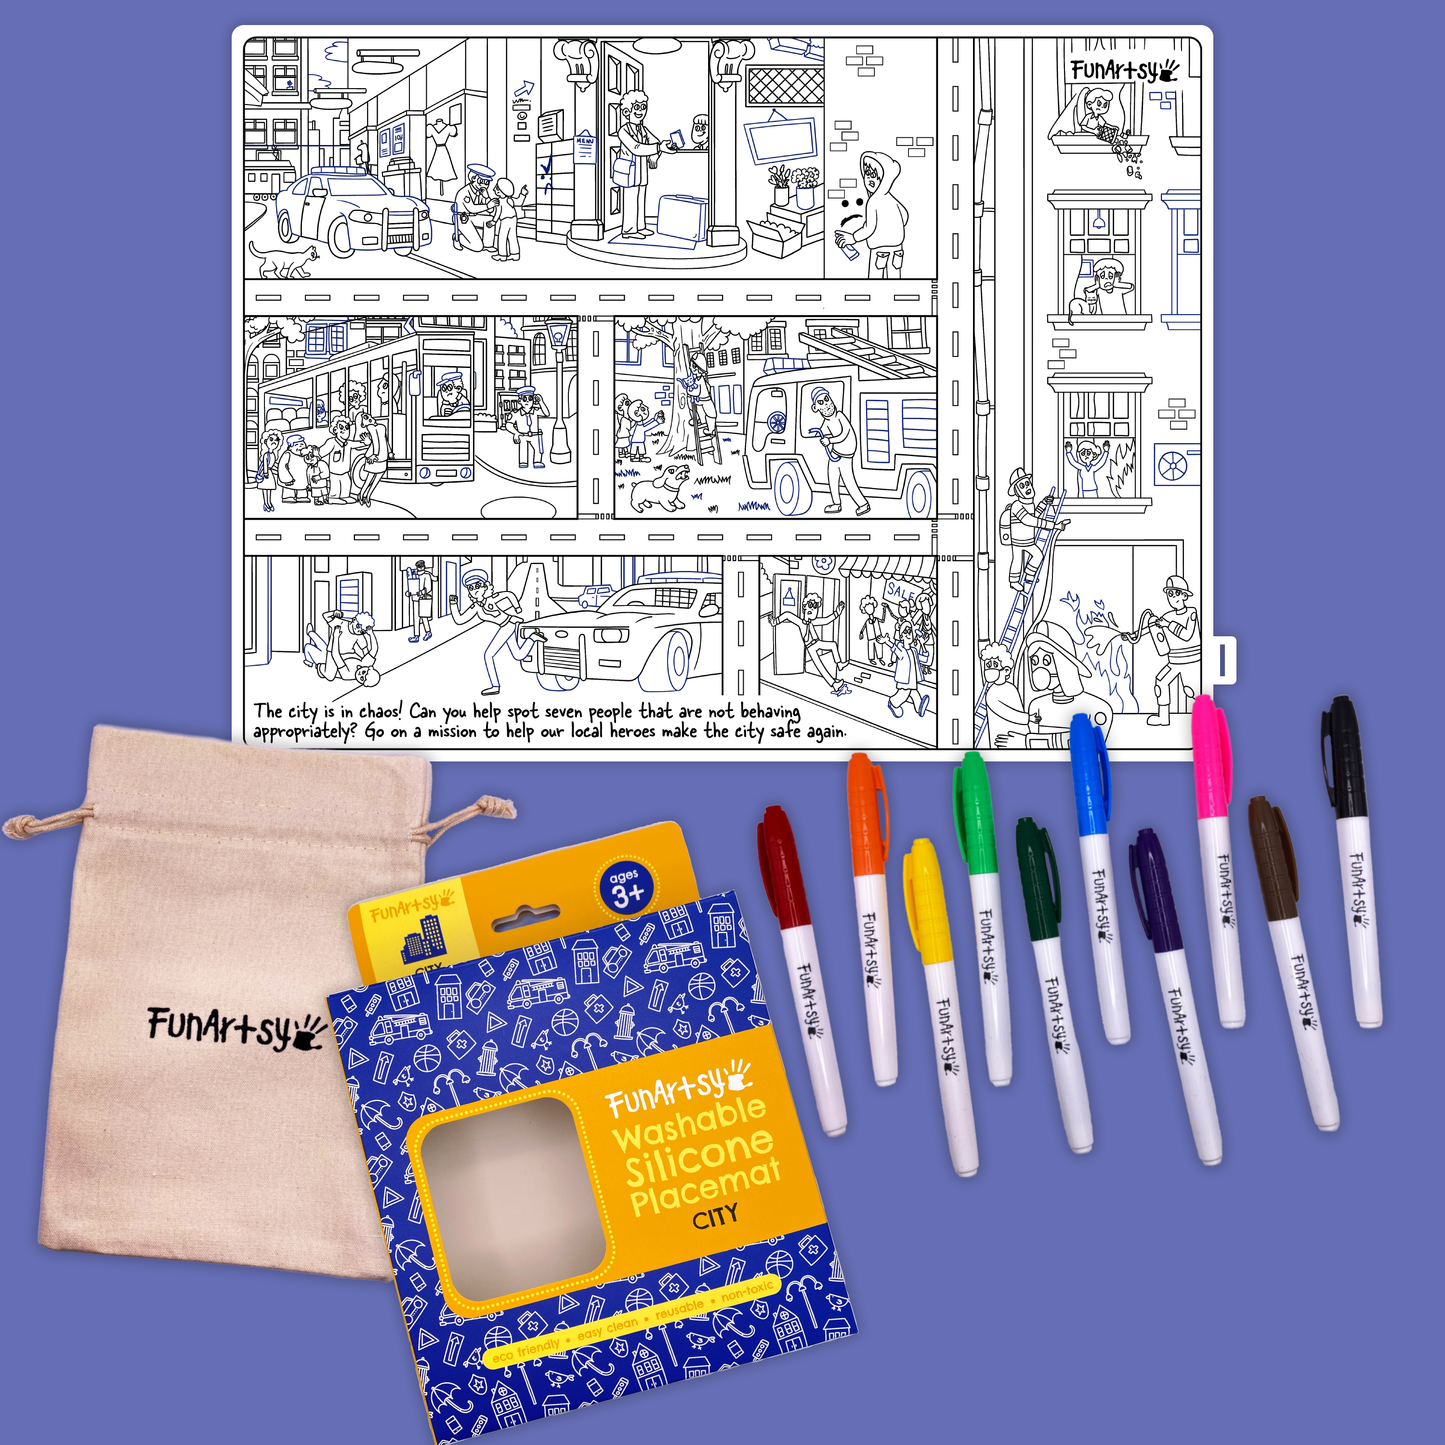 Washable Silicone Placemat (City)